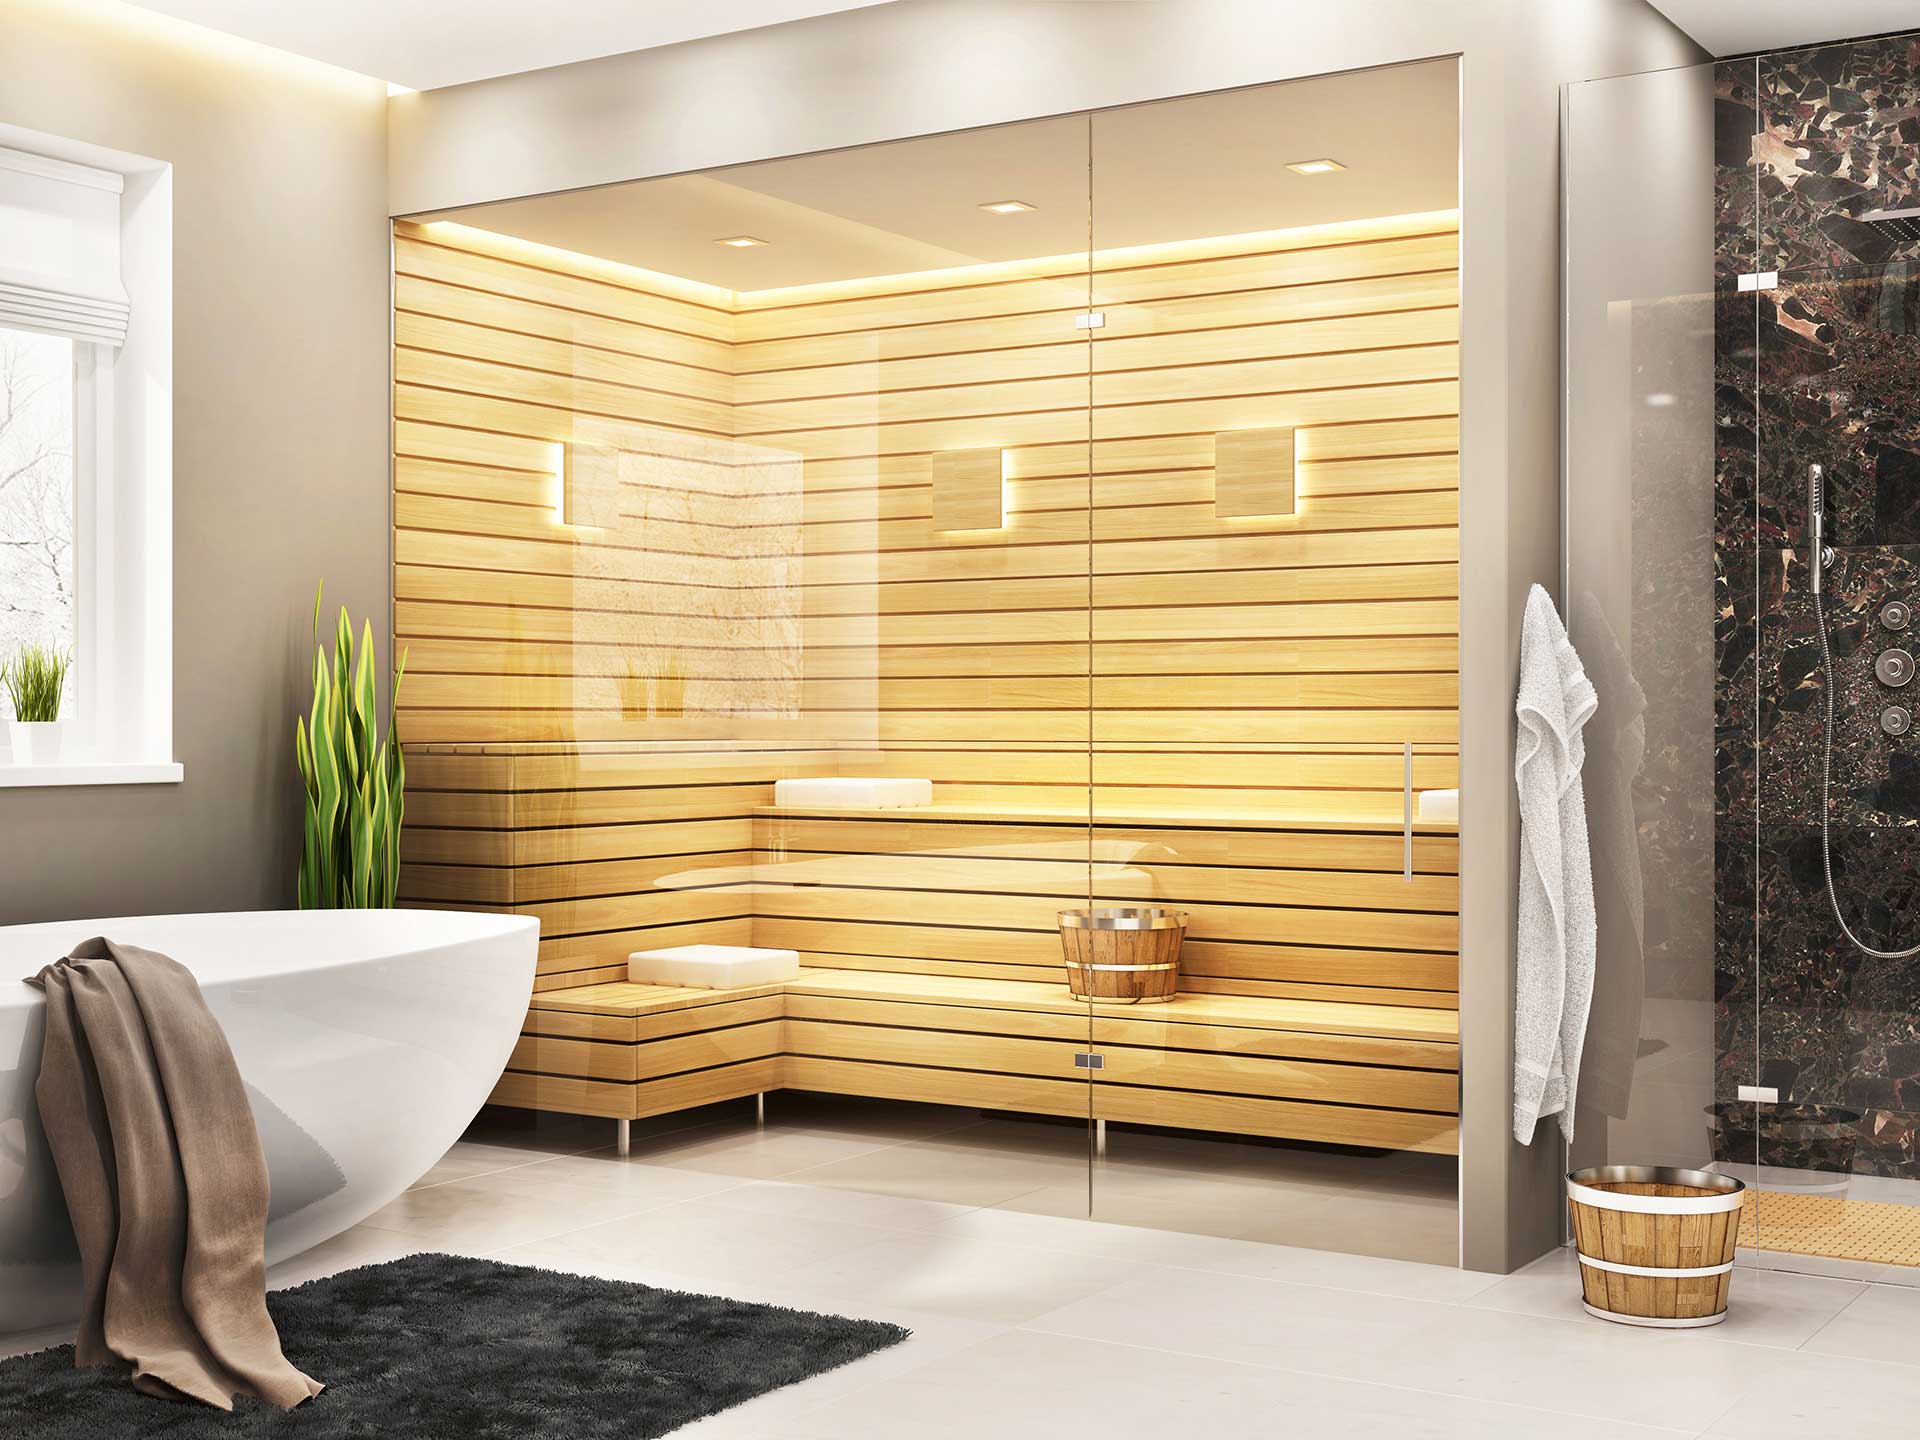 Bathroom sauna: What you need to know when purchasing